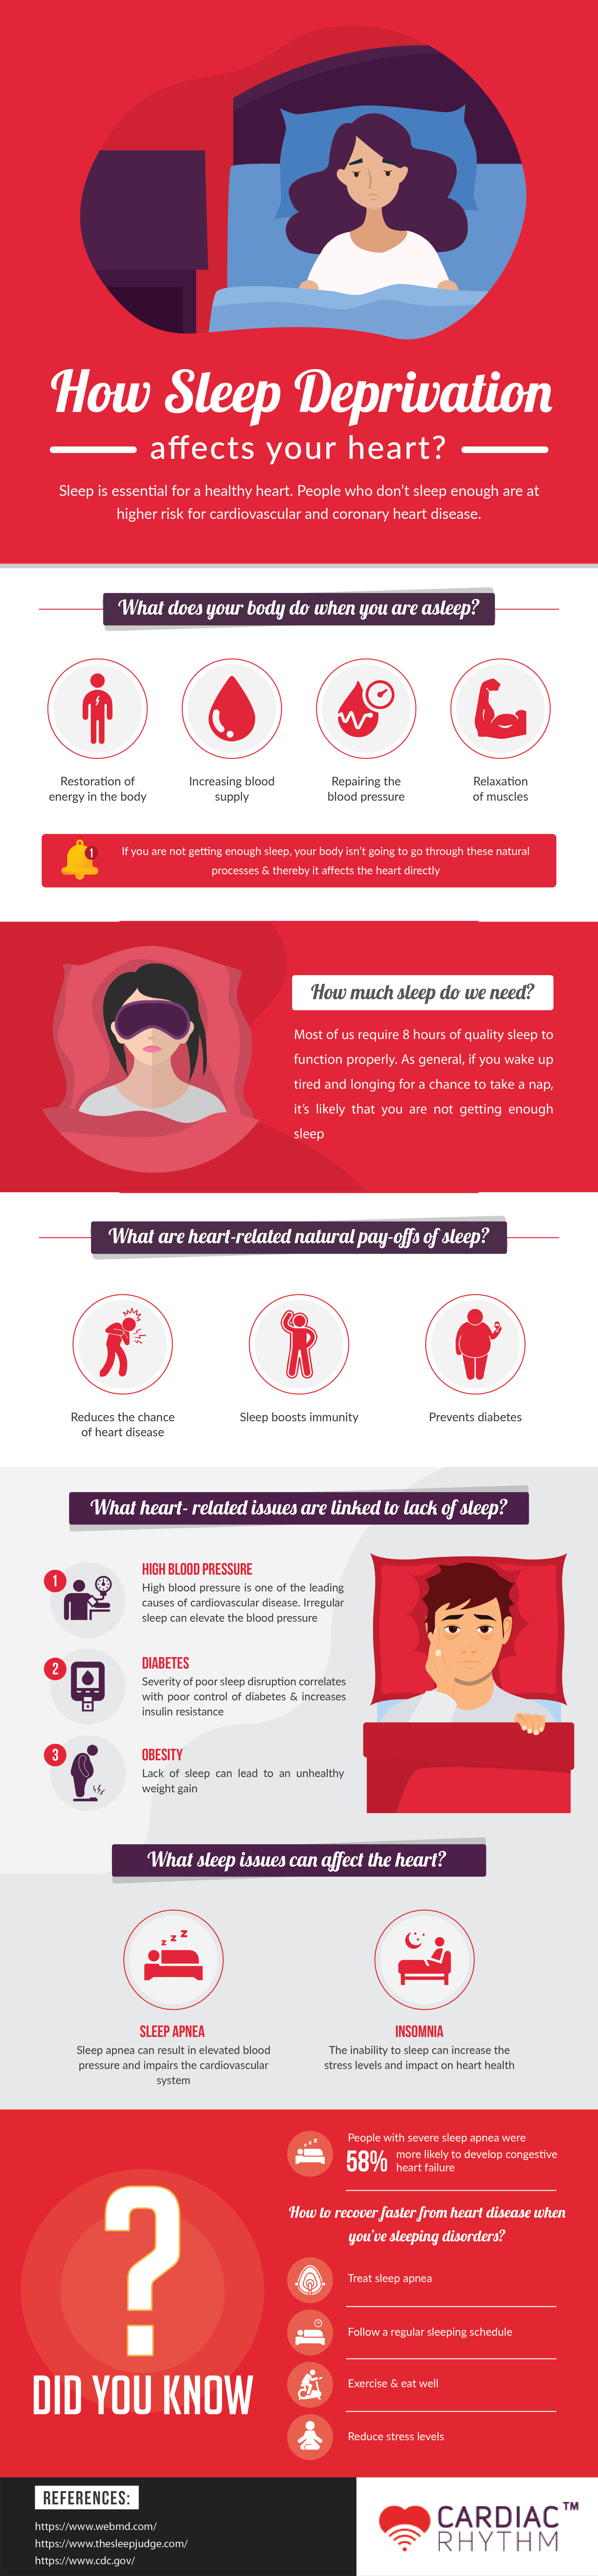 The Unhealthy Connection Between Sleep Deprivation and Heart Disease - Infographic